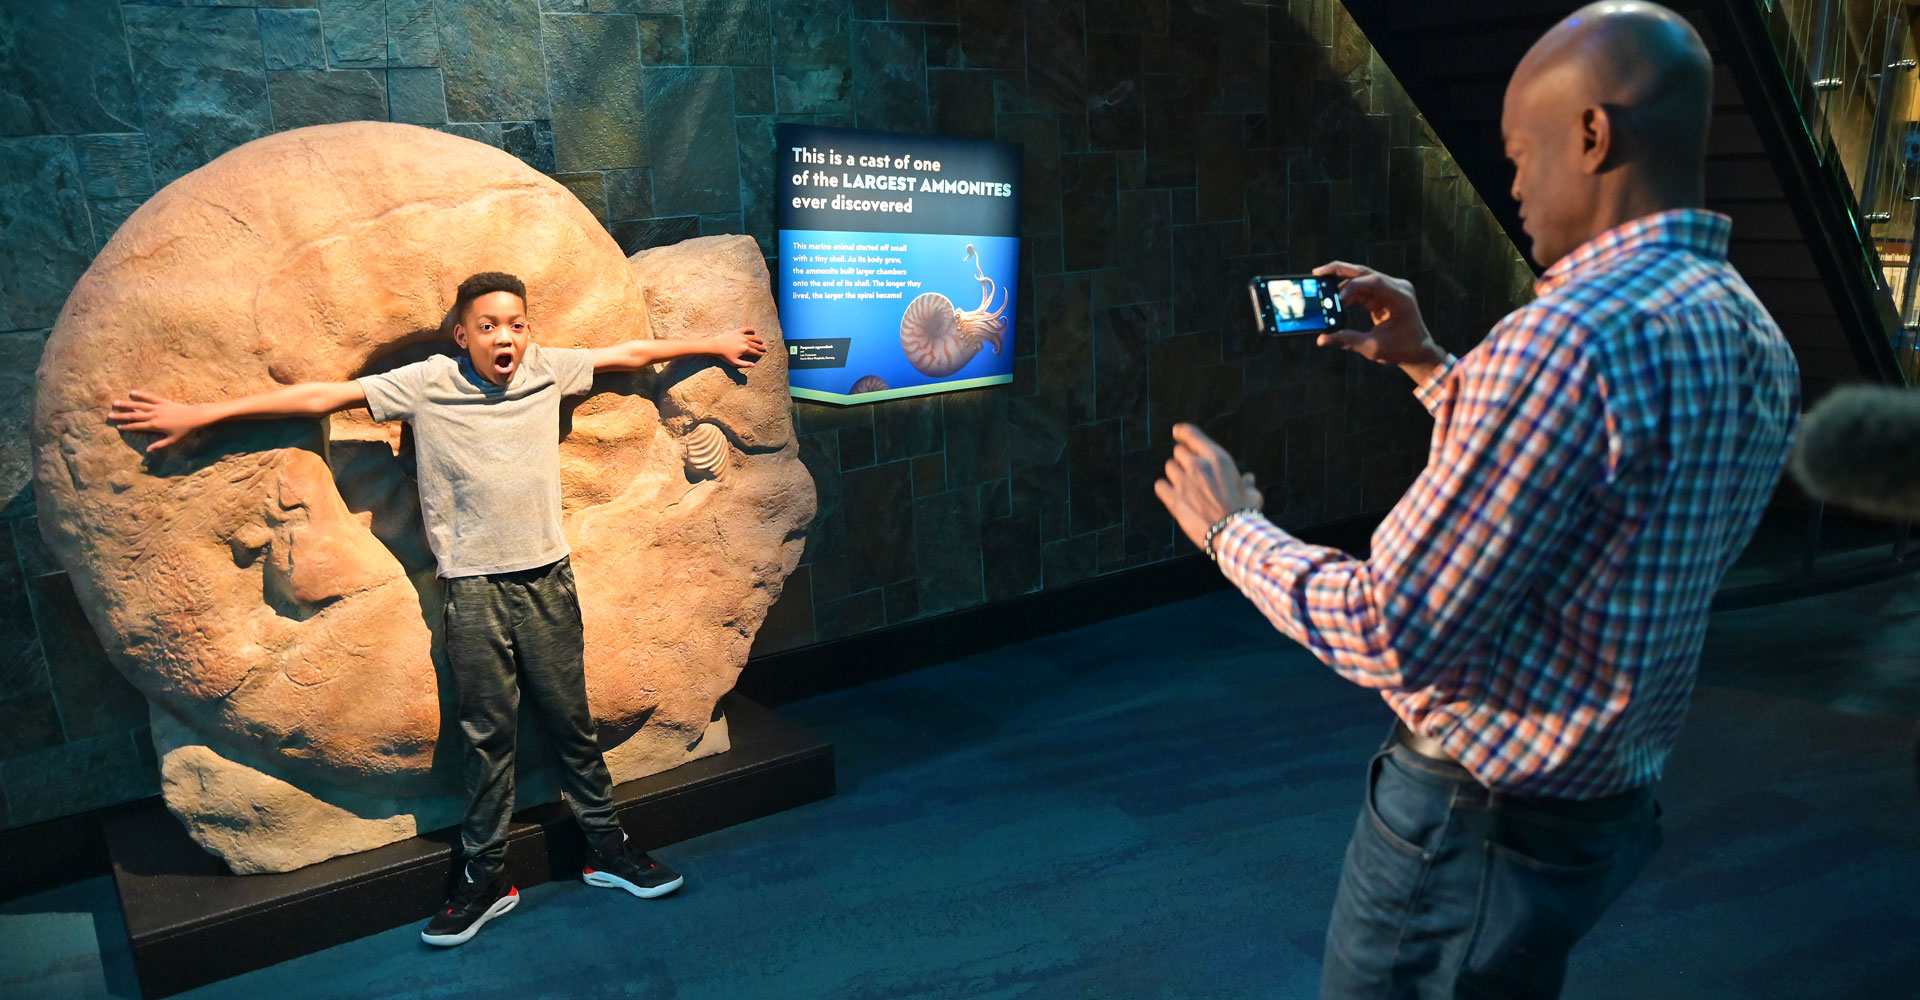 Grown-up taking a photo of child with mouth open and arms spread out, showing the size of a giant ammonite fossil.